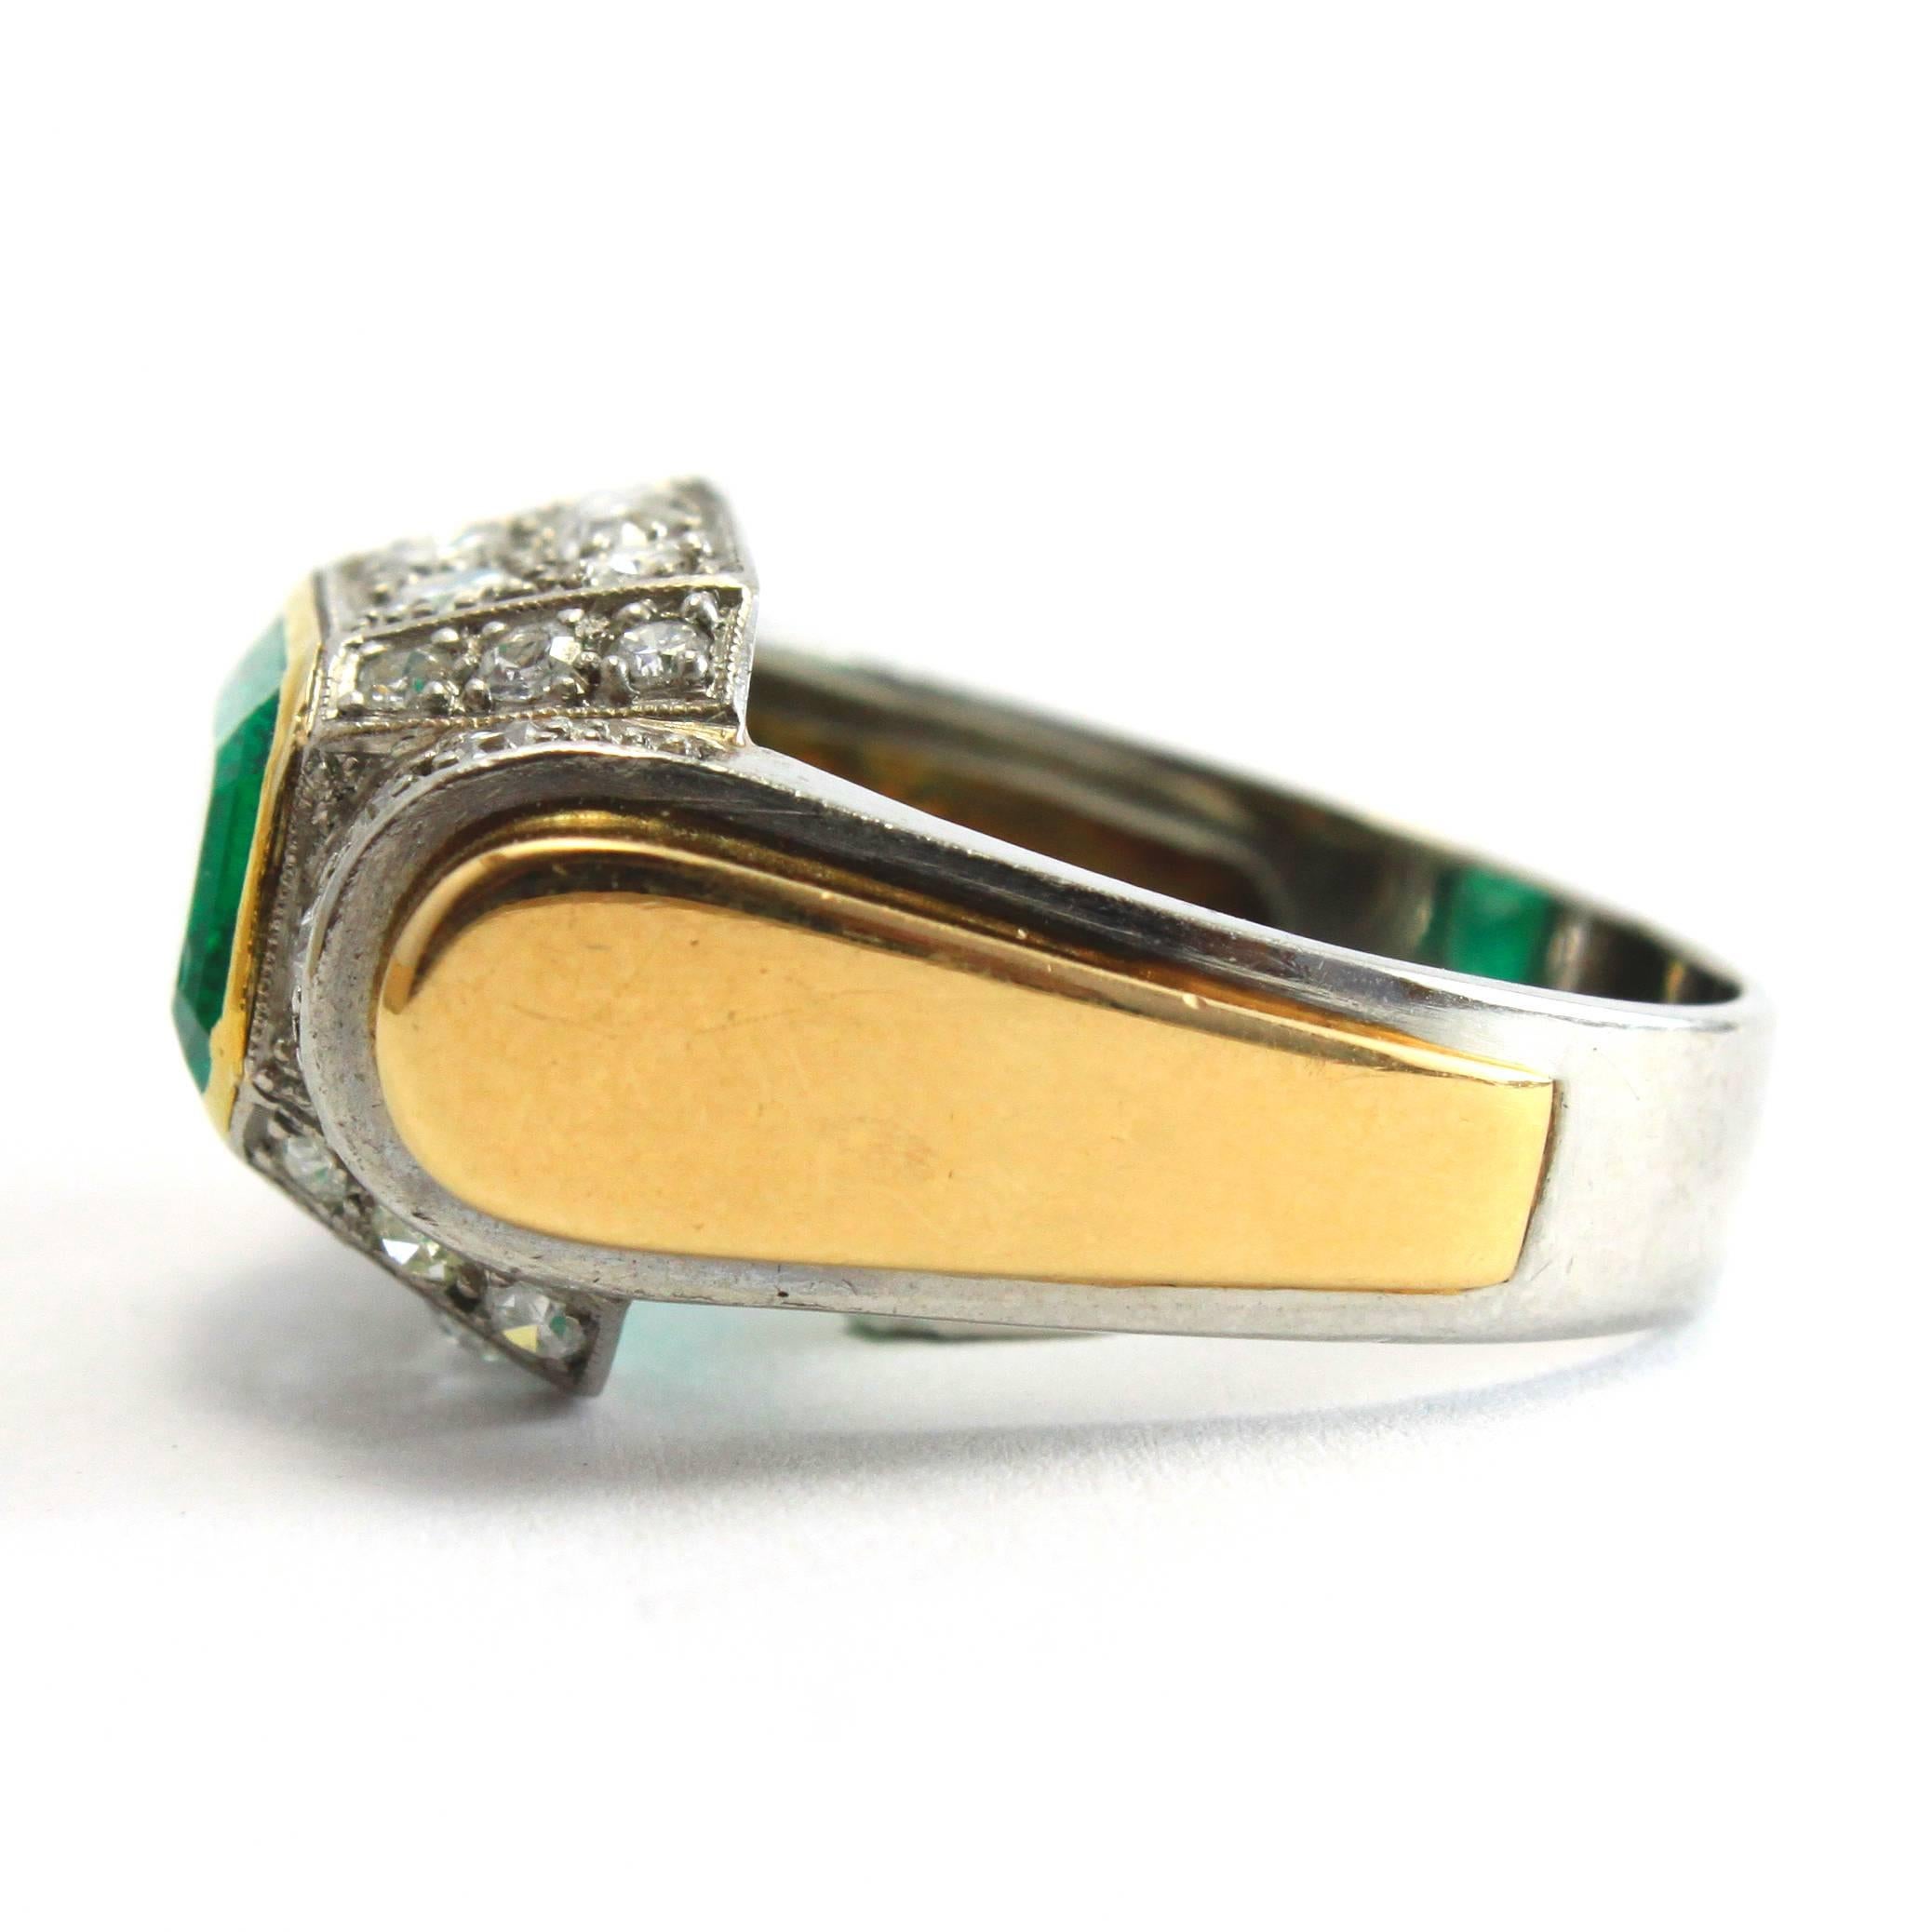 A beautiful Art Deco Emerald and Diamond platinum and yellow gold ring, ca. 1935.

The ring has a very strong and unusual design, by beautifully combining architectural Art Deco elements with some Retro features. The Colombian (old-mine) emerald